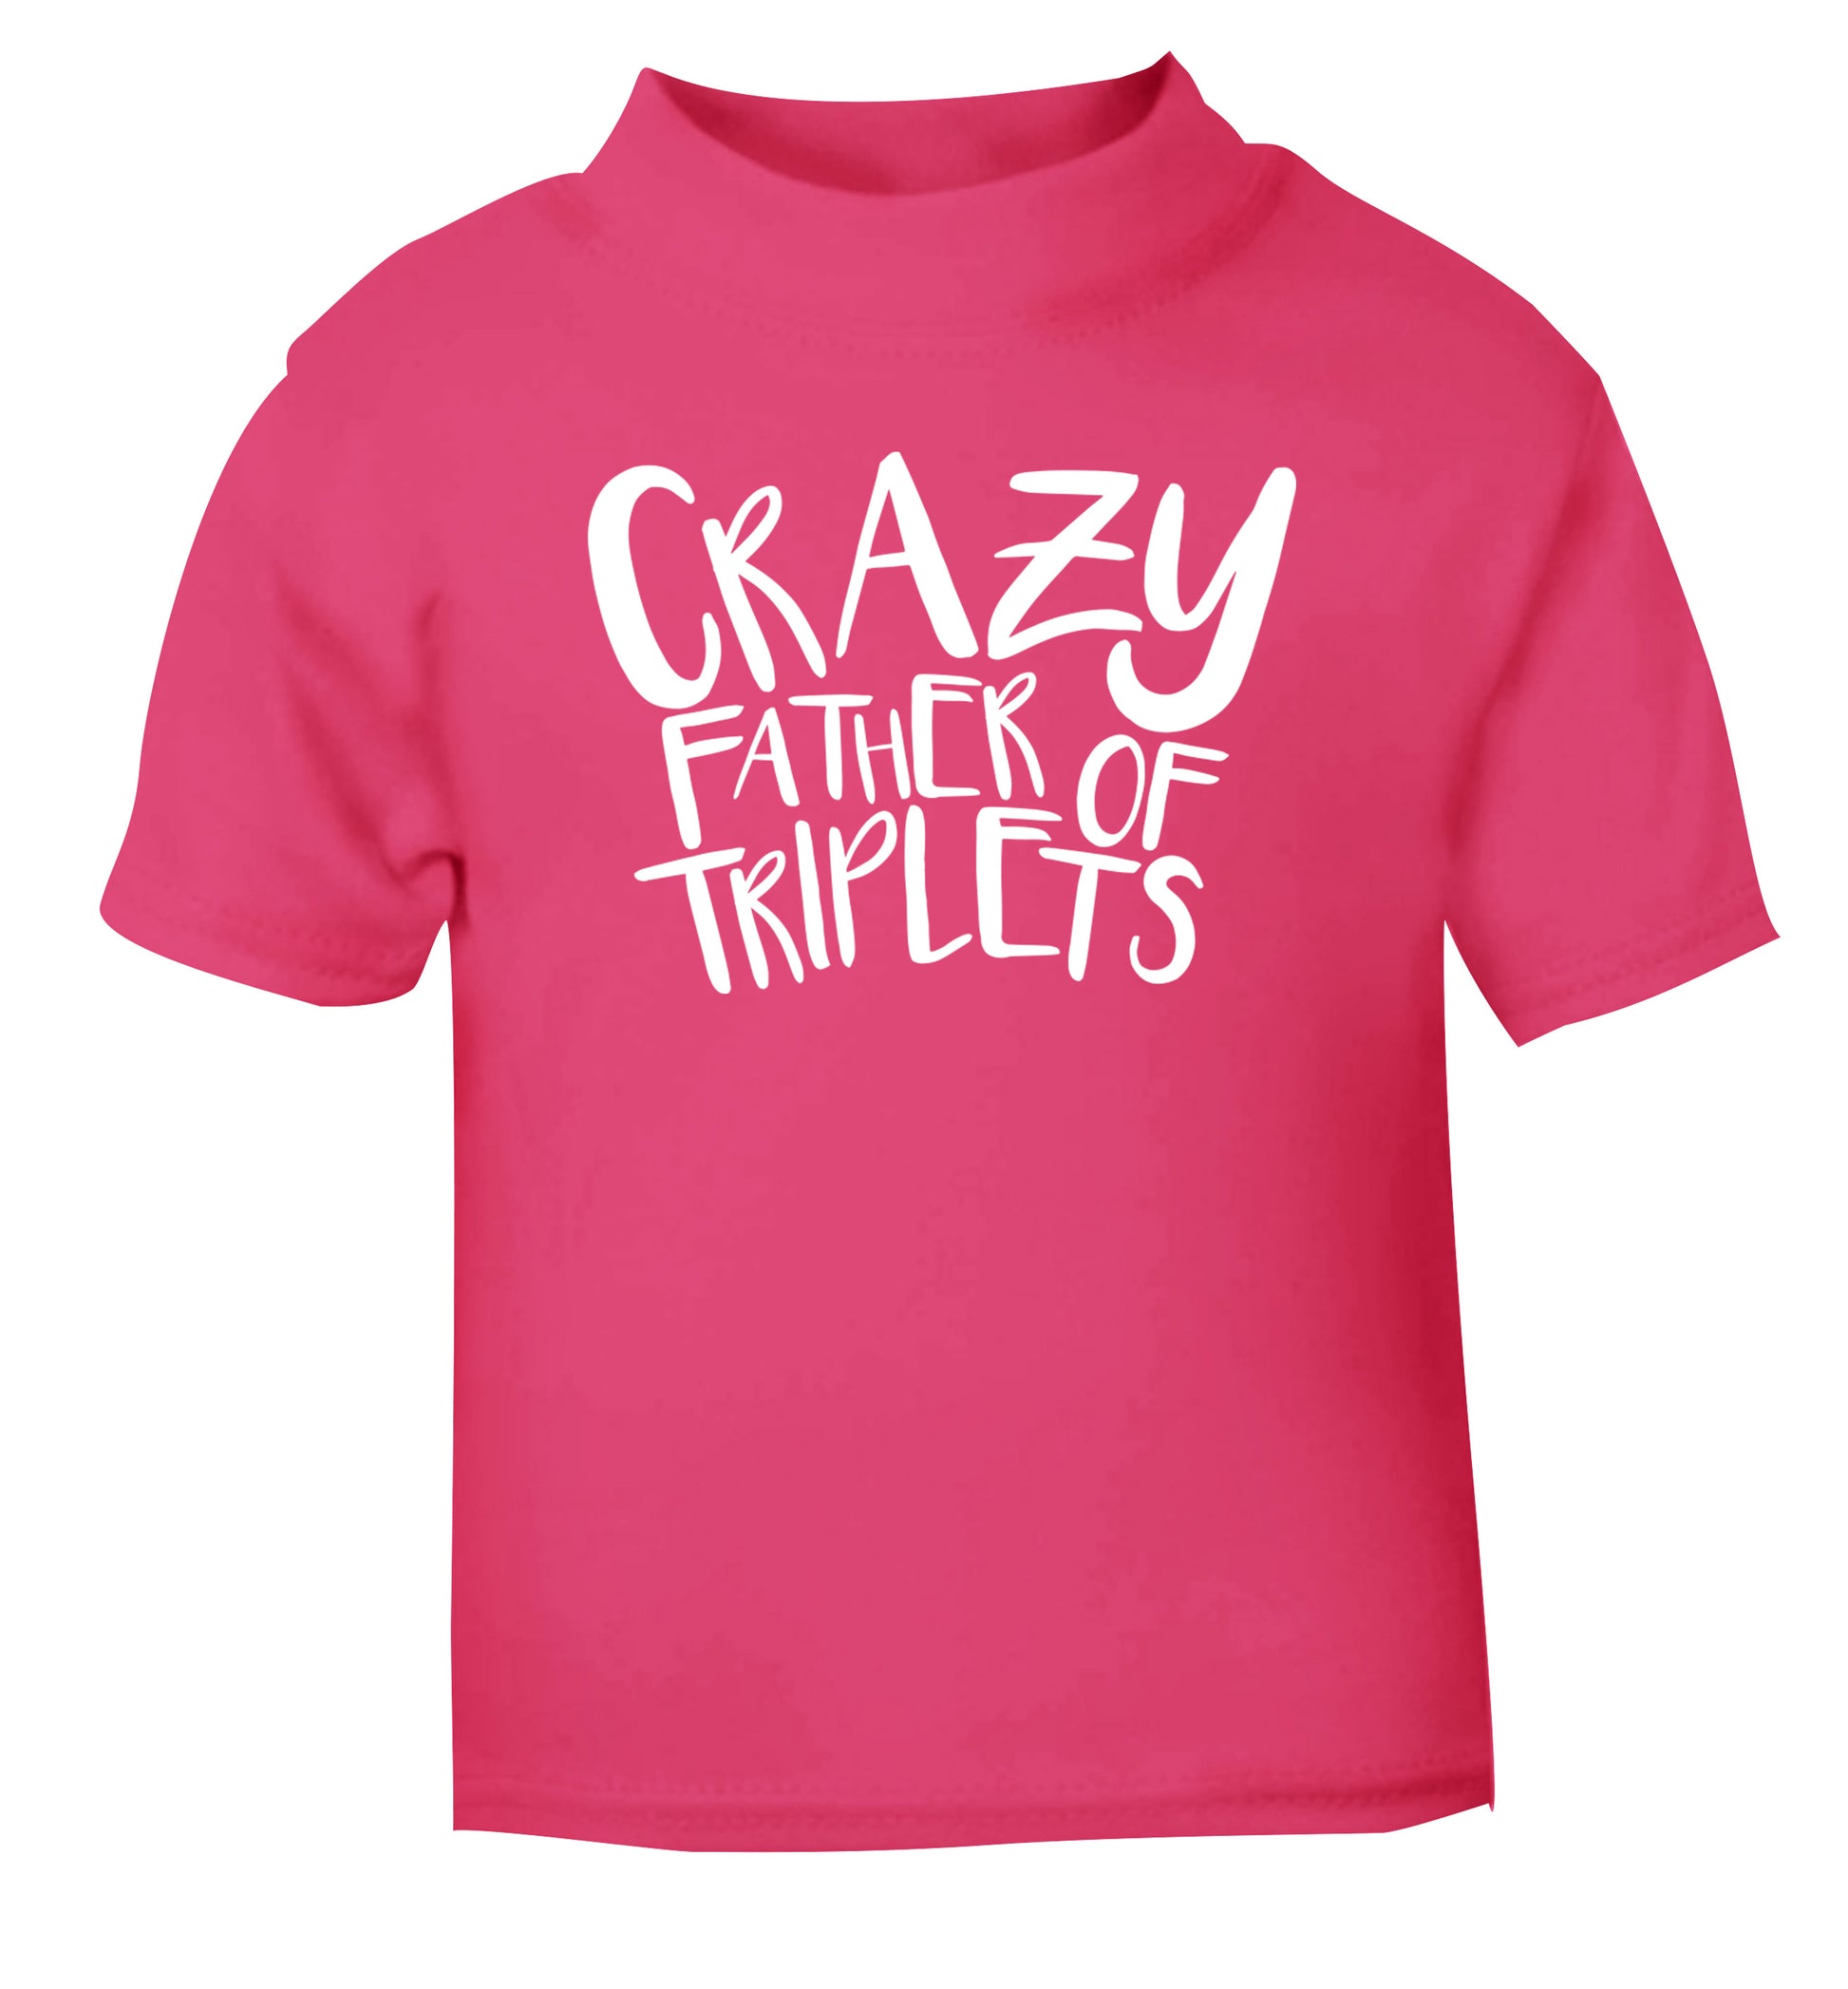 Crazy father of triplets pink Baby Toddler Tshirt 2 Years